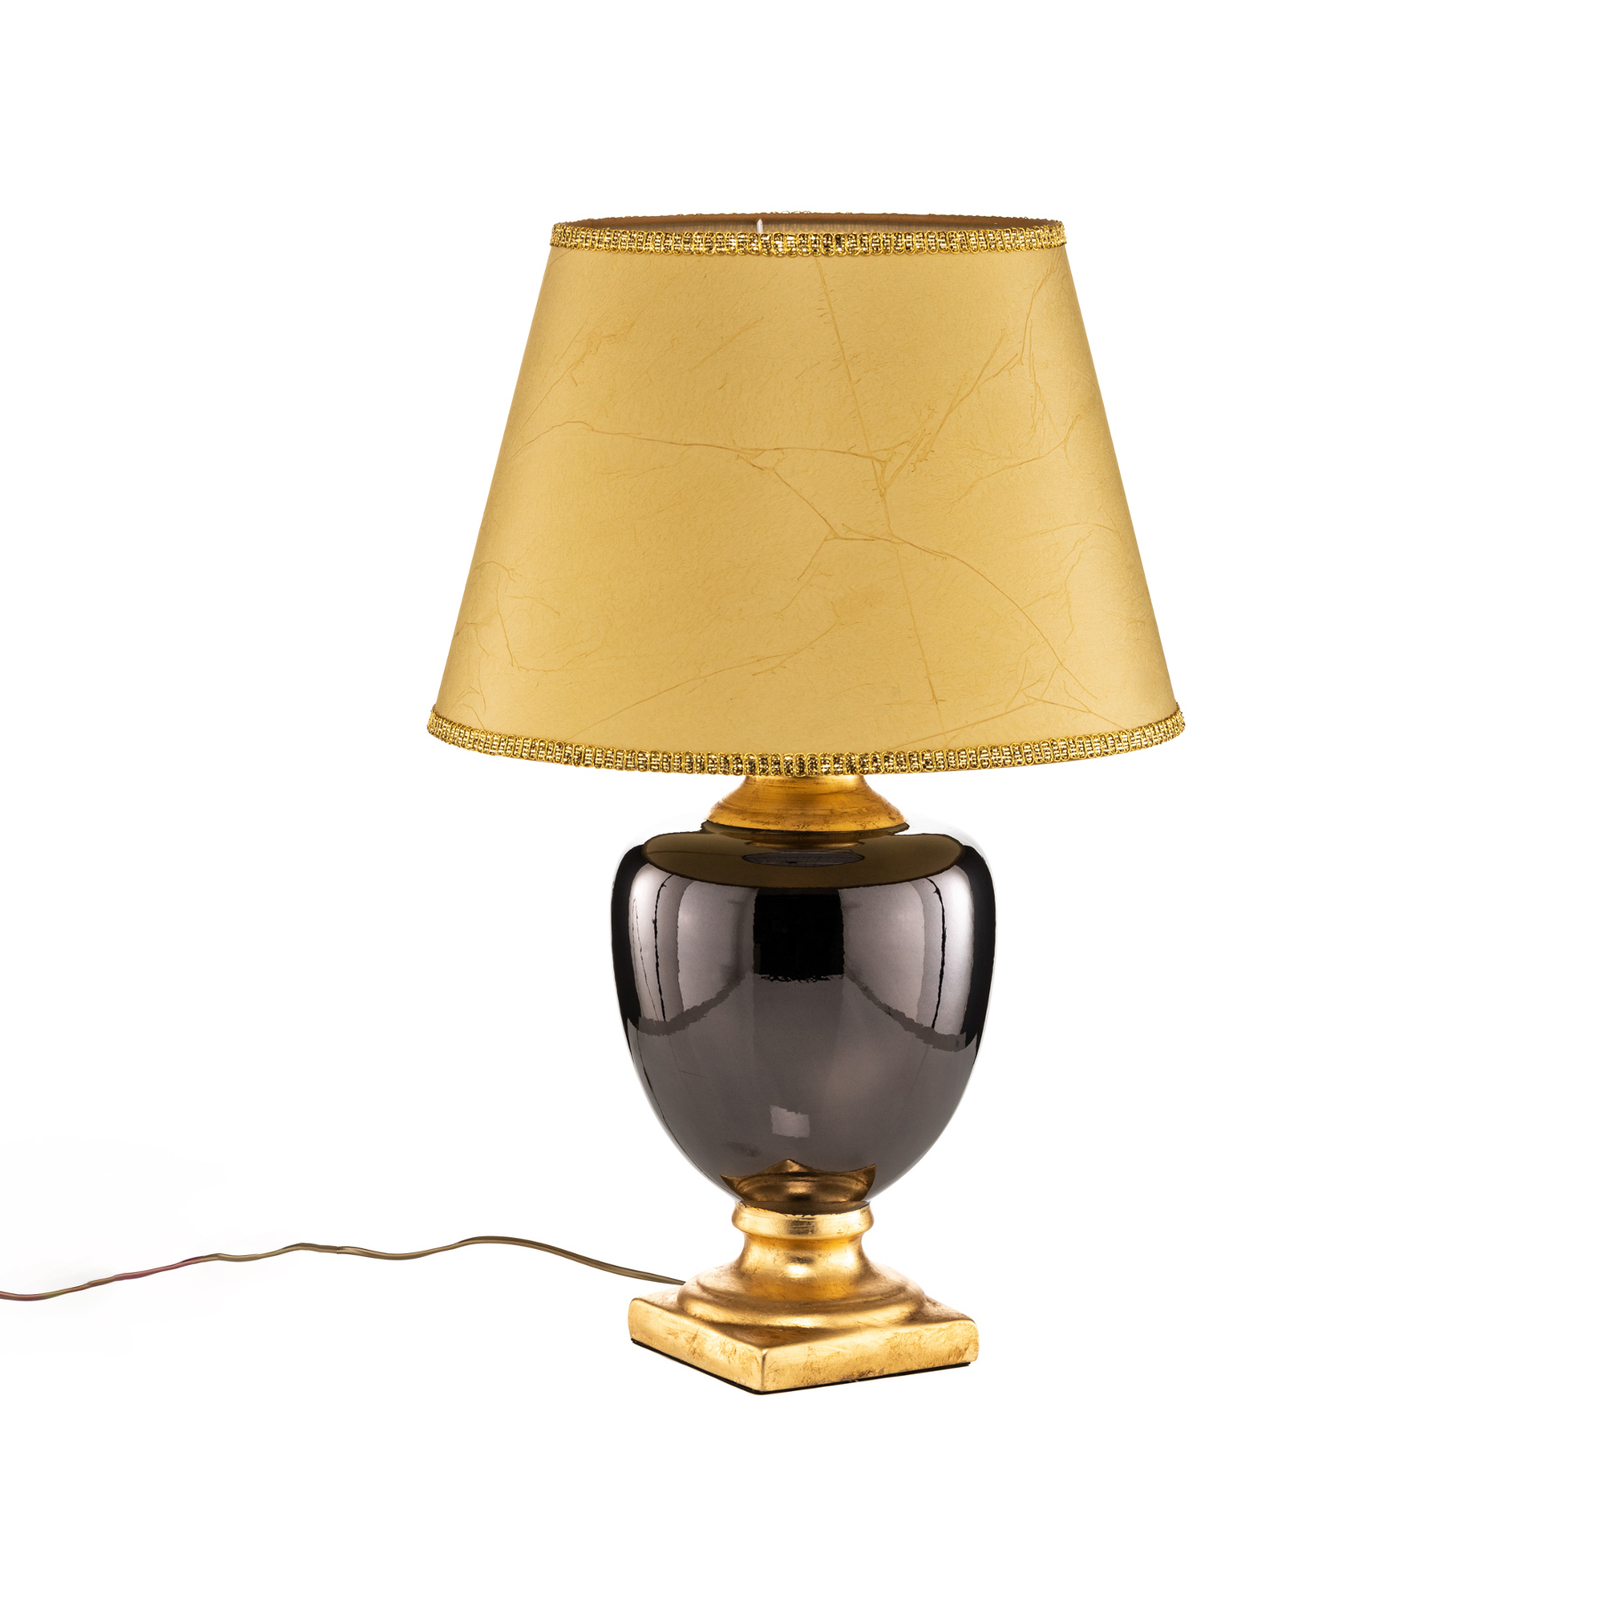 Mozart table lamp in mirrored grey/gold